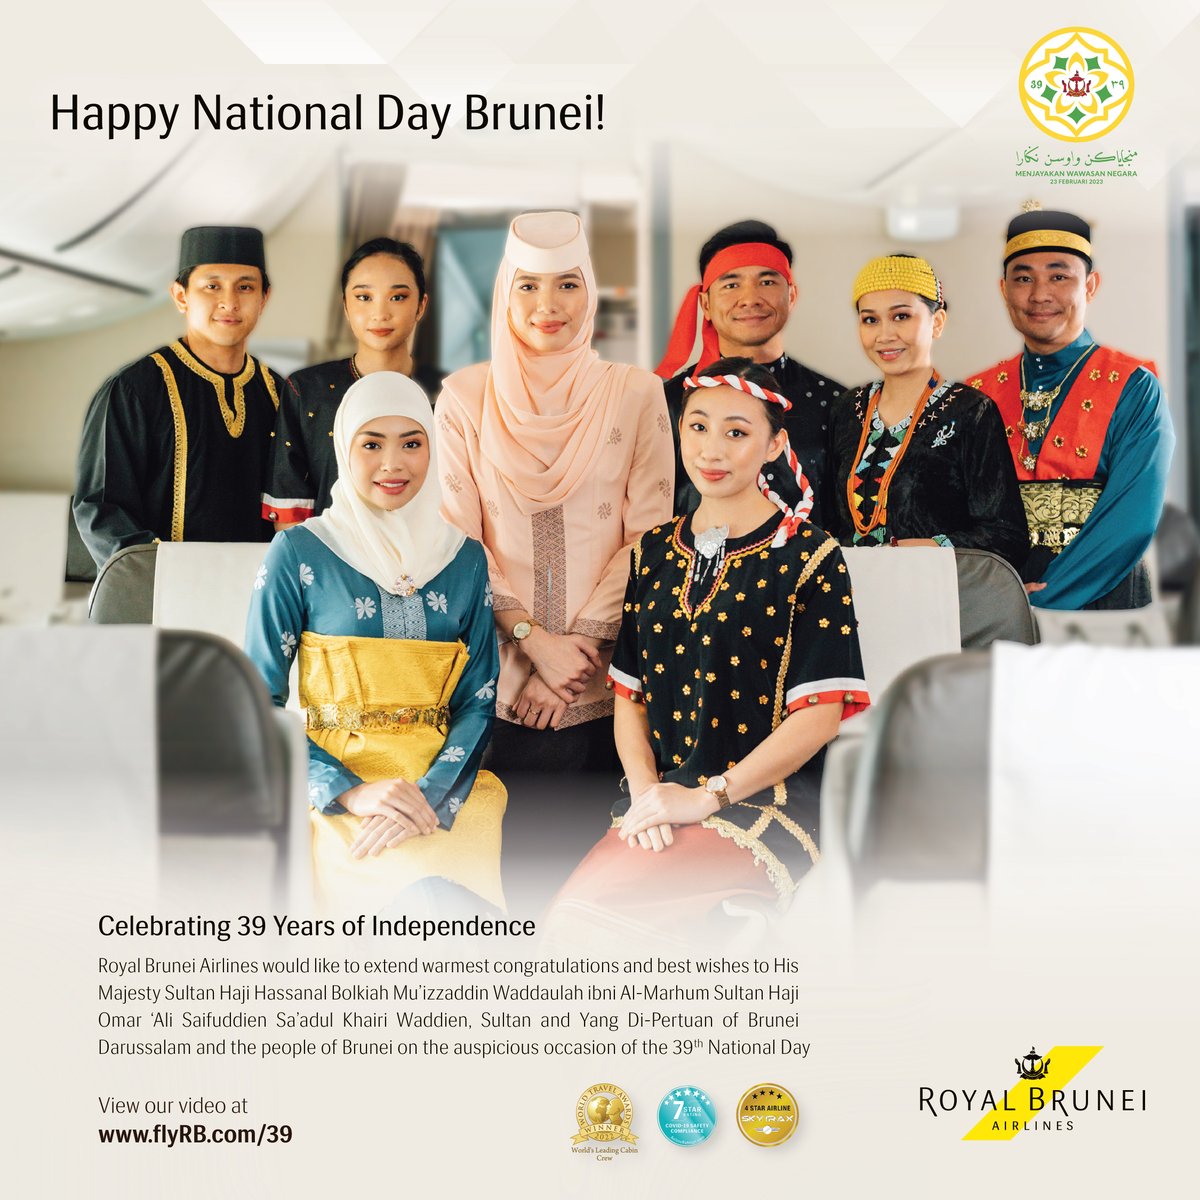 Celebrating 39 Years of Independence 🇧🇳 Happy National Day to His Majesty The Sultan and the people of Brunei Darussalam from all of us at #TeamRB. Watch our official video at flyRB.com/39 flyRB.com/38